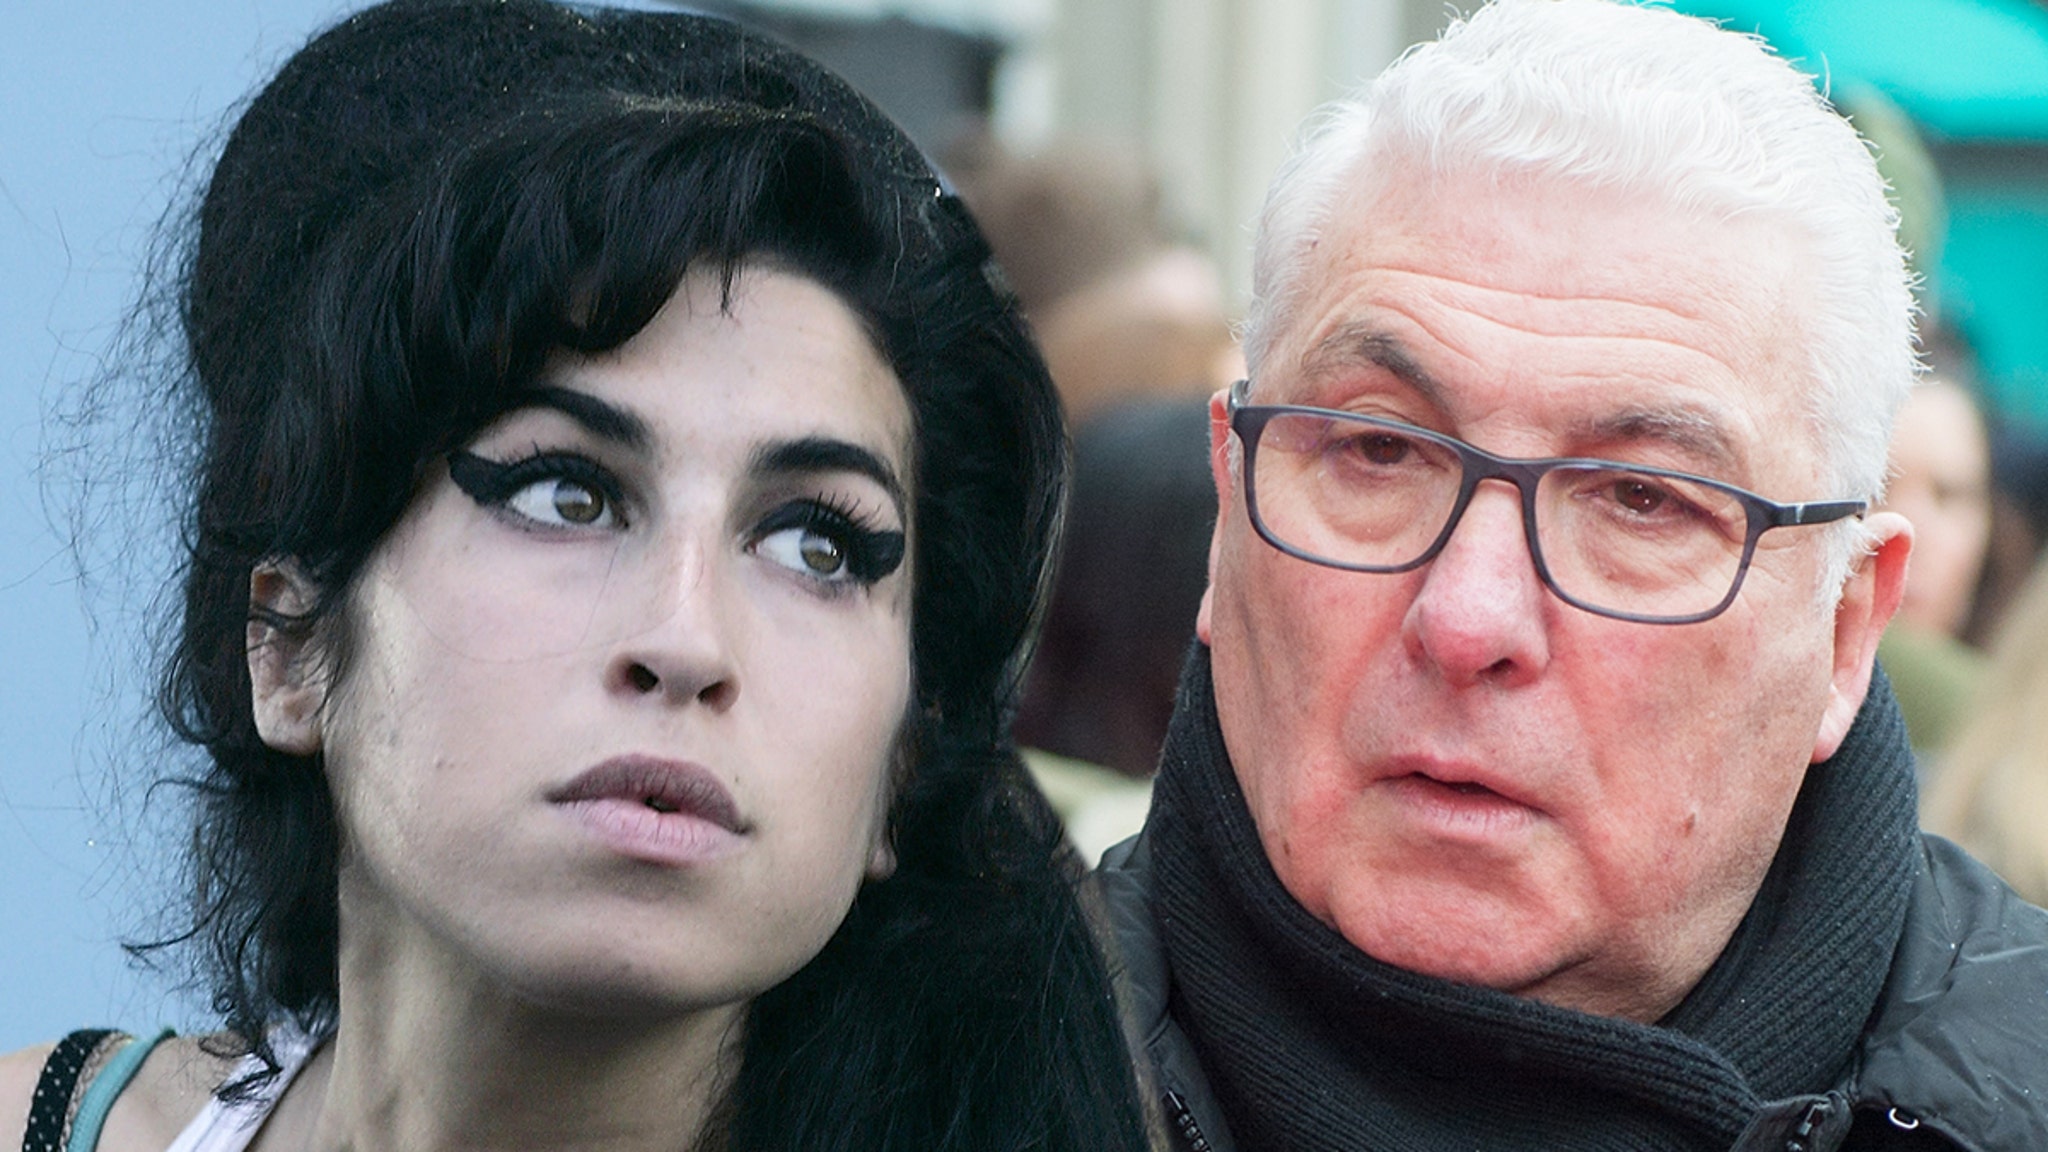 Amy Winehouse's Father Slams Planned Biopic, Says Studio Has No Right to Make It - TMZ